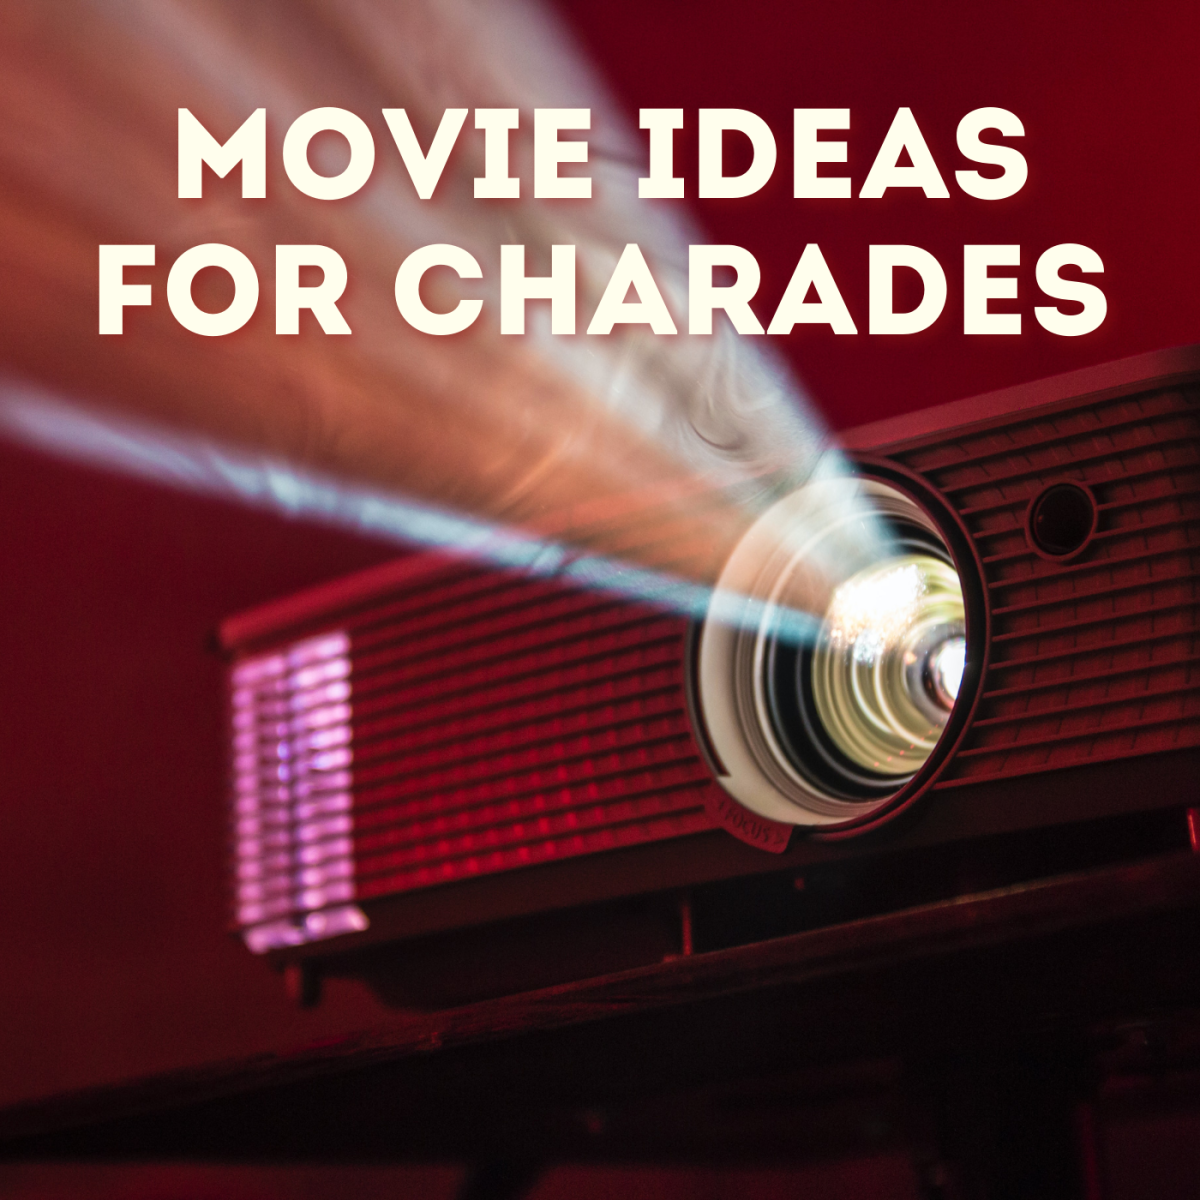 Charades Ideas: 150+ Movie and Film Titles